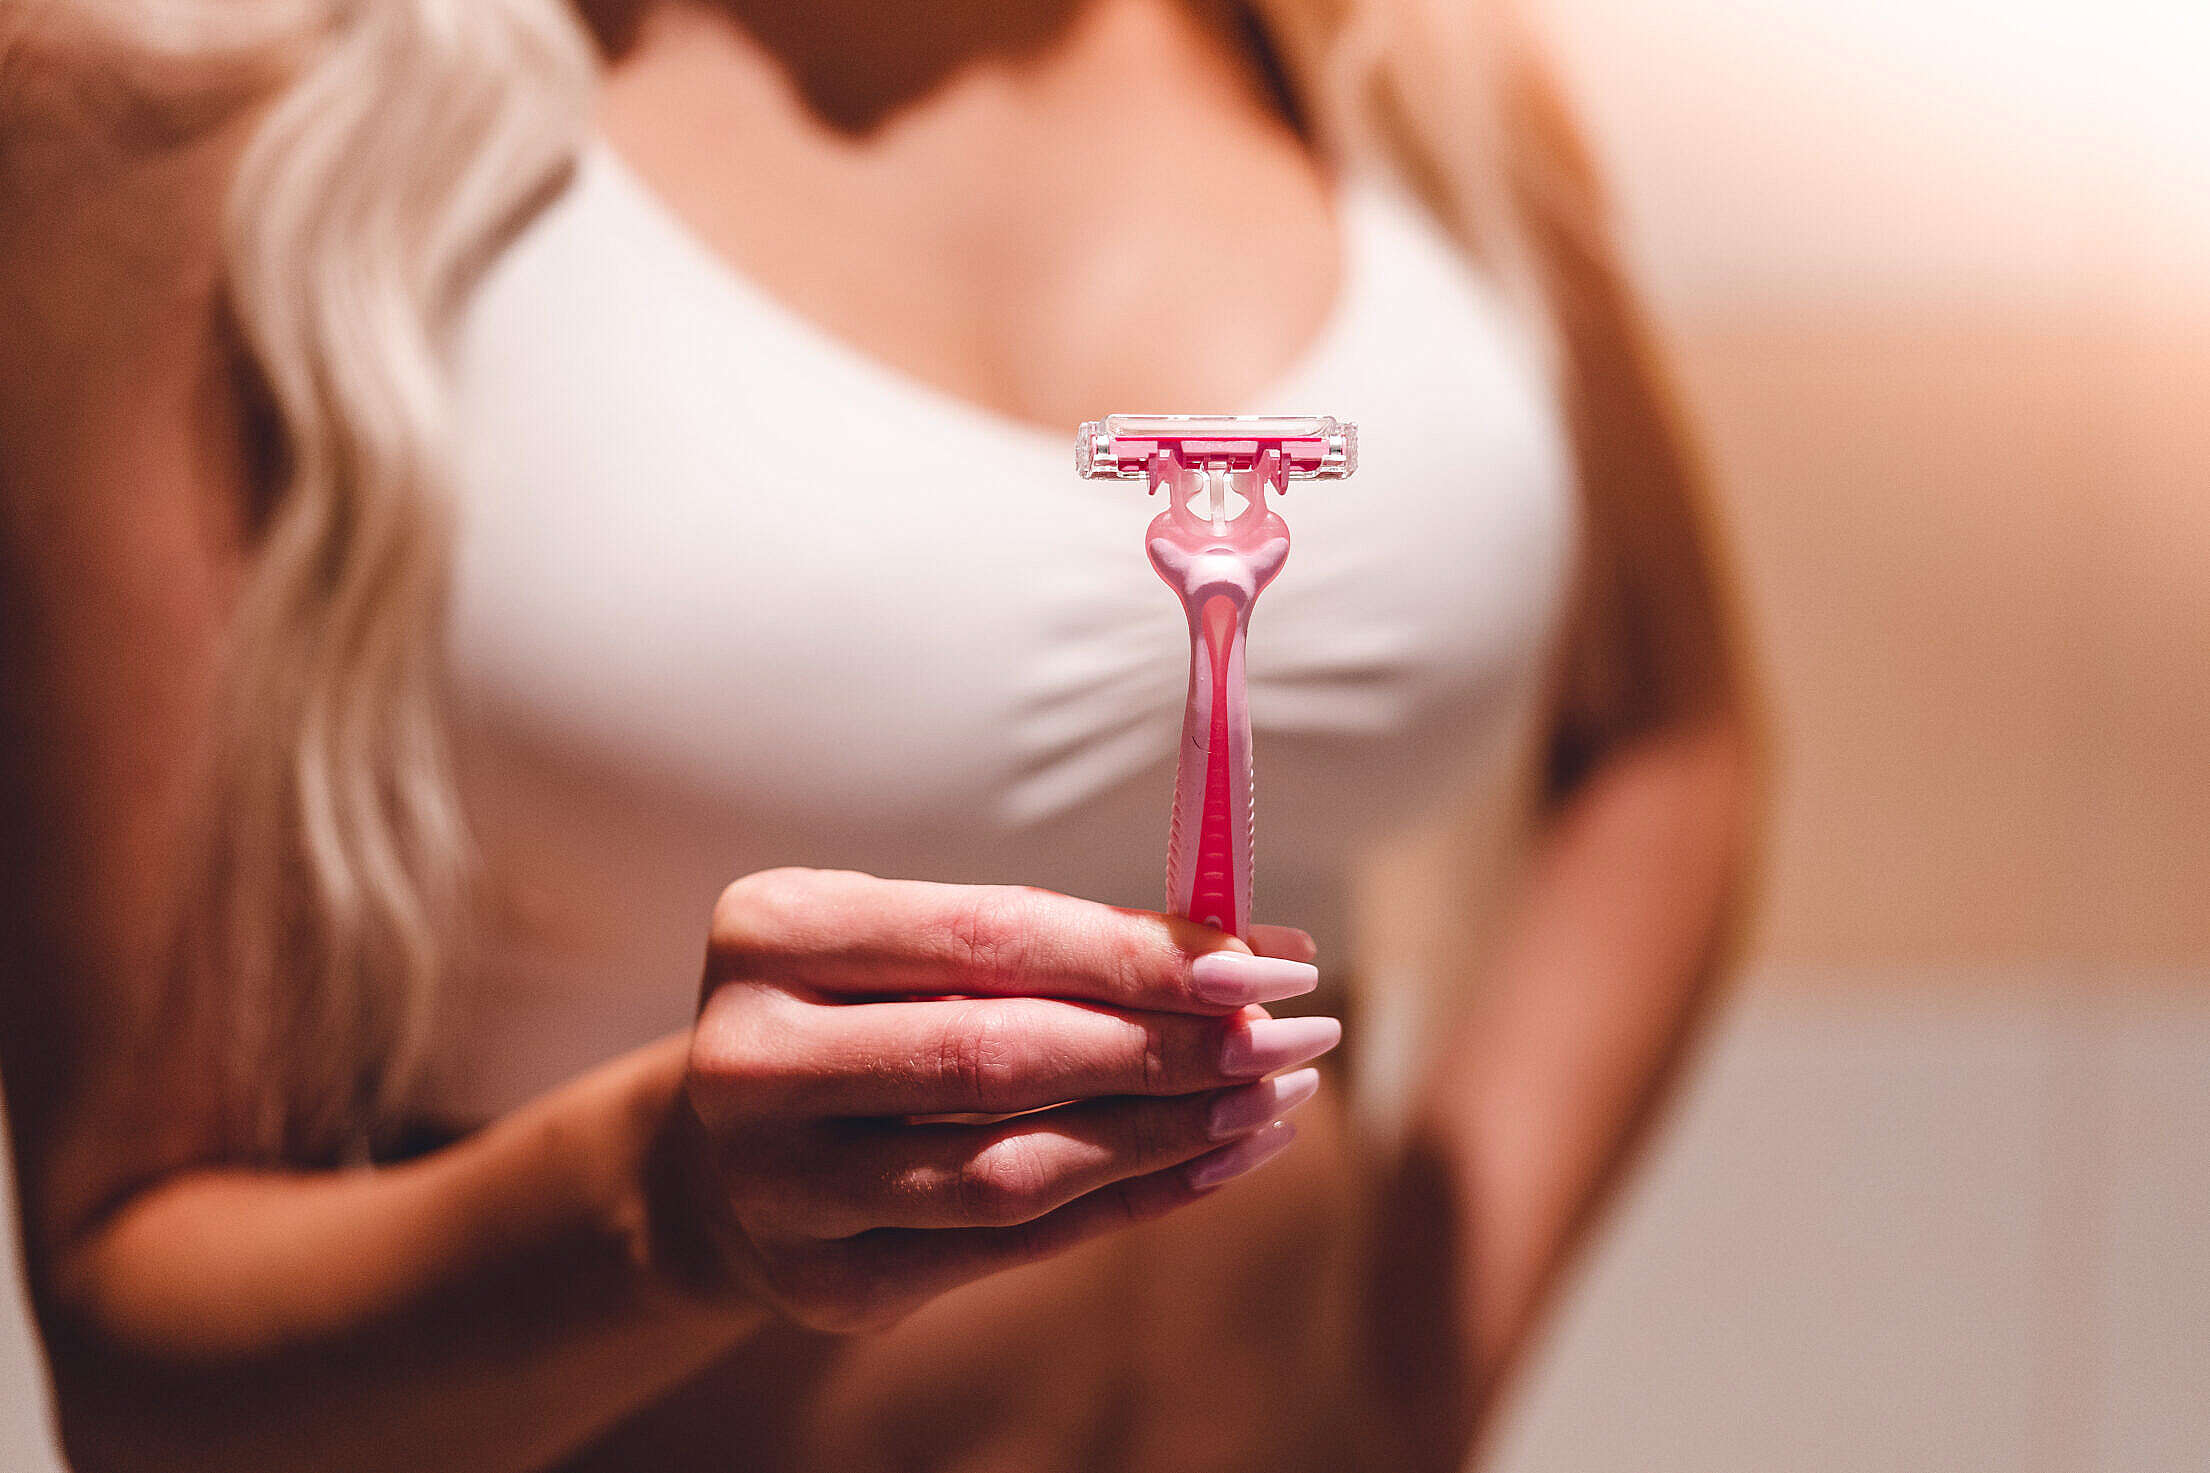 Woman Holding a Pink Shaving Razor in Her Hand Free Stock Photo